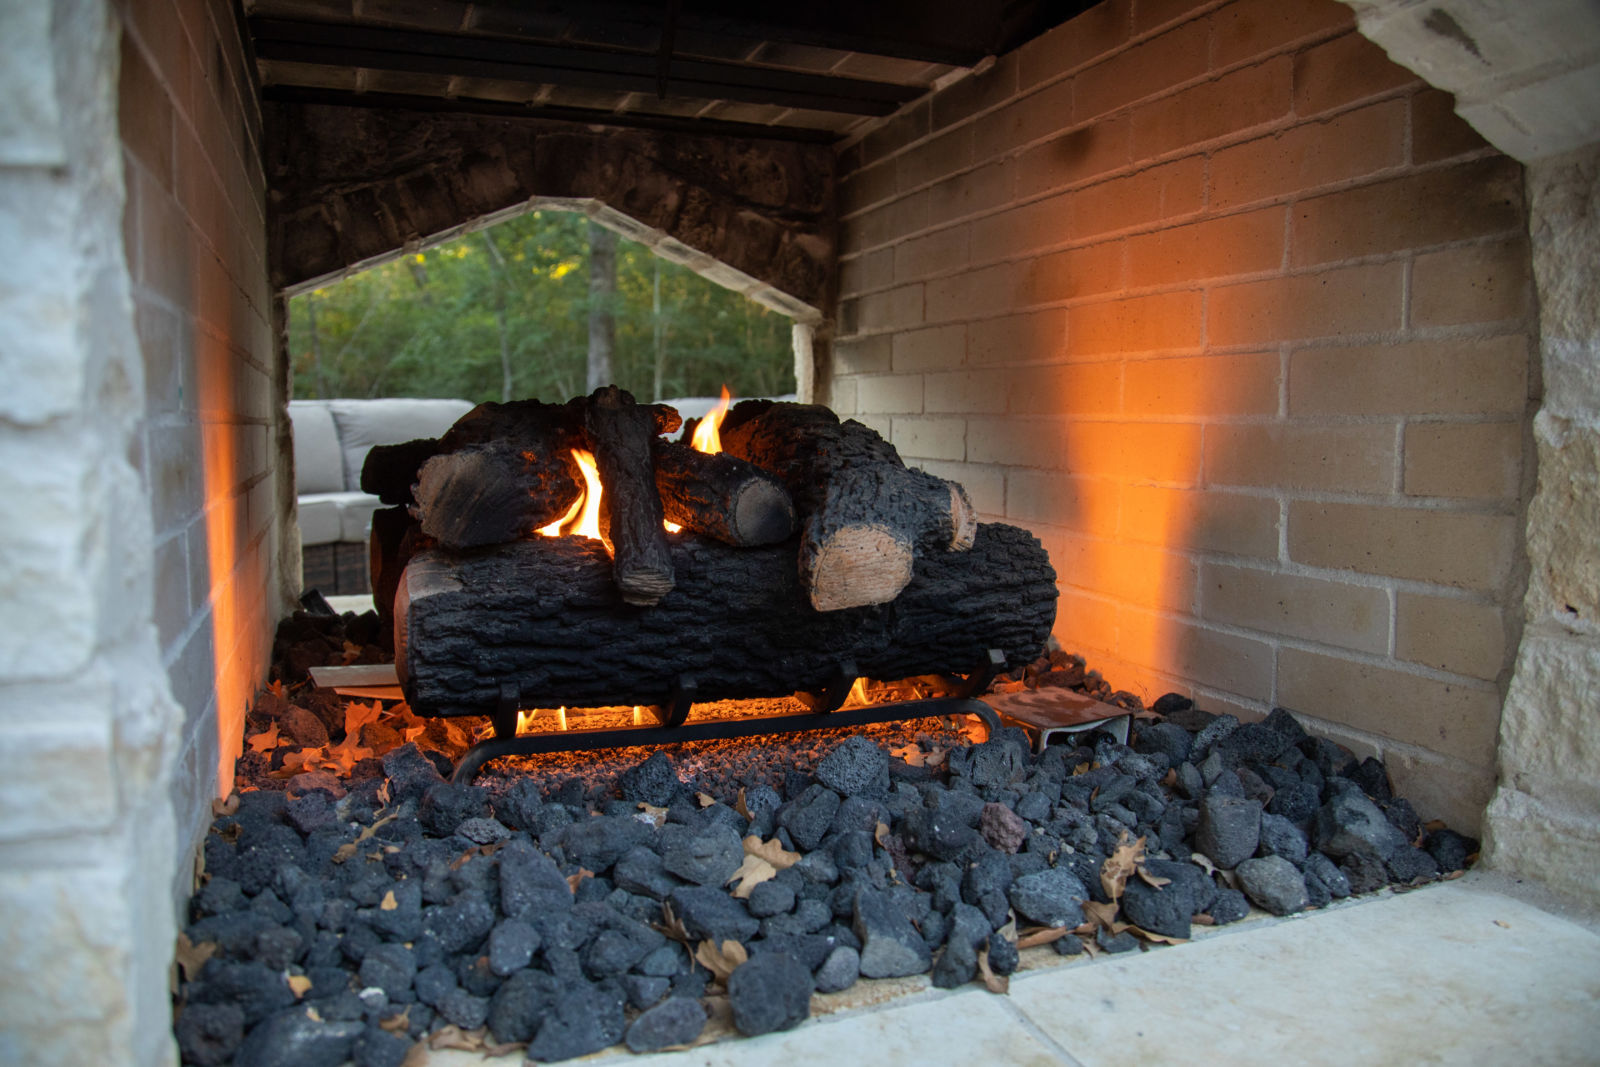 alt="logs in outdoor fireplace with glowing fire on black rocks, couches off in distance in background"